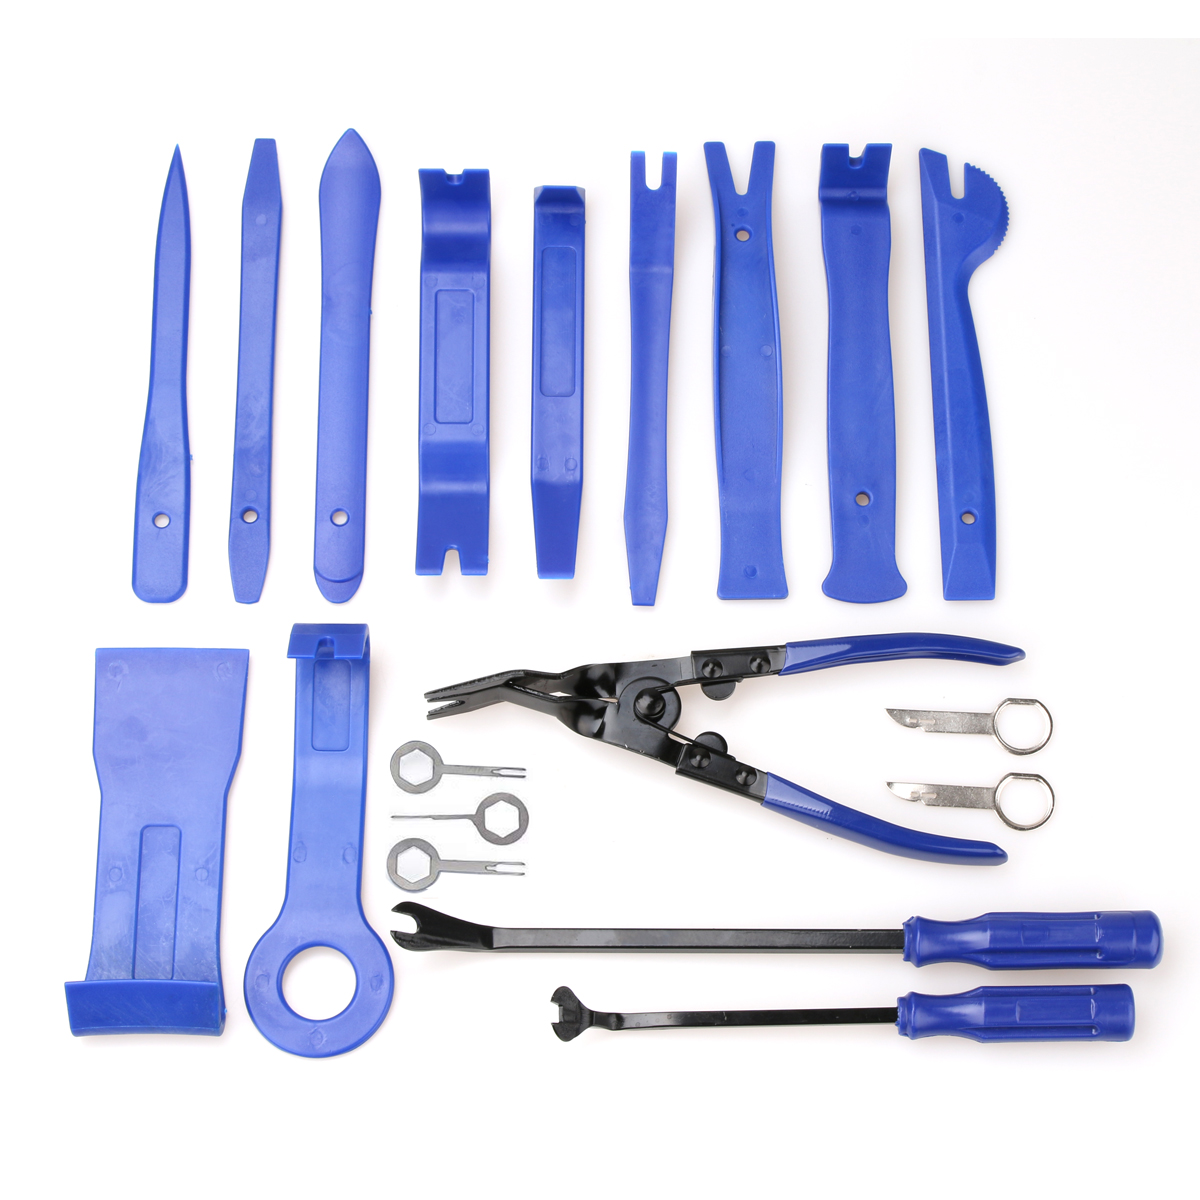 258pcs/set Auto Trim Removal Tool Kit Including Fastener Clips Pliers &  Valve Core & Door Upholstery Remover & Car Audio Removal Keys,  Multi-functional Automotive Repair Tool Box, With Professional Storage Bag,  Portable